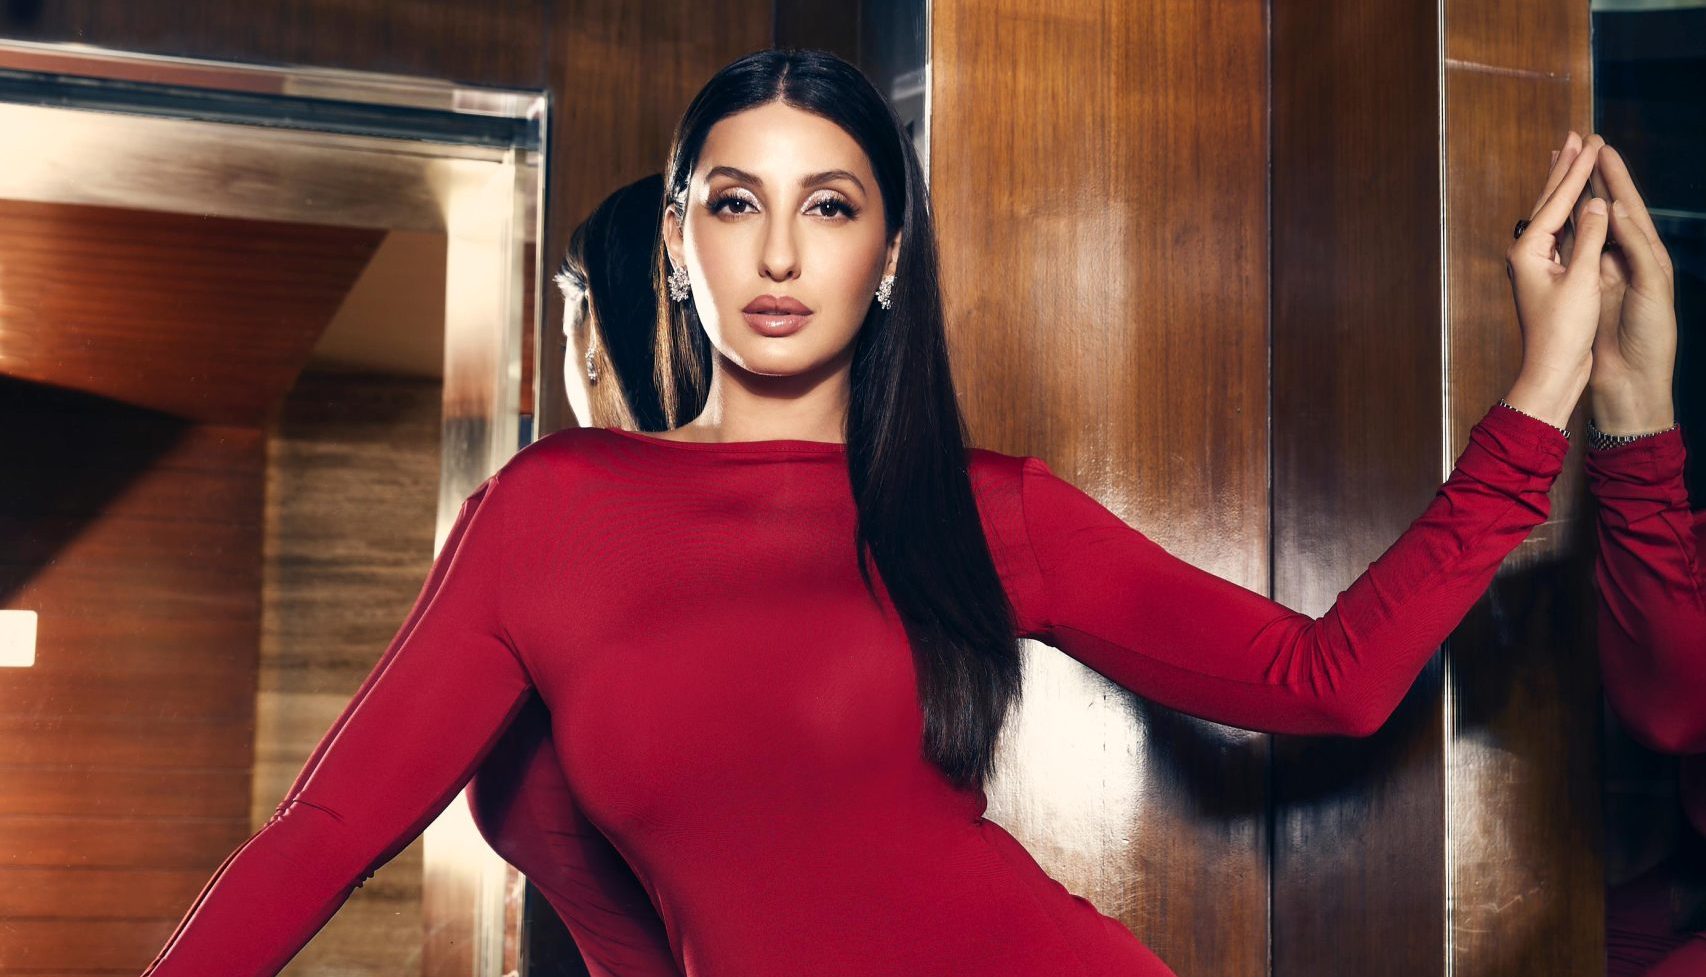 A new chapter in Nora Fatehi’s international career, a record deal with Warner Music Group!